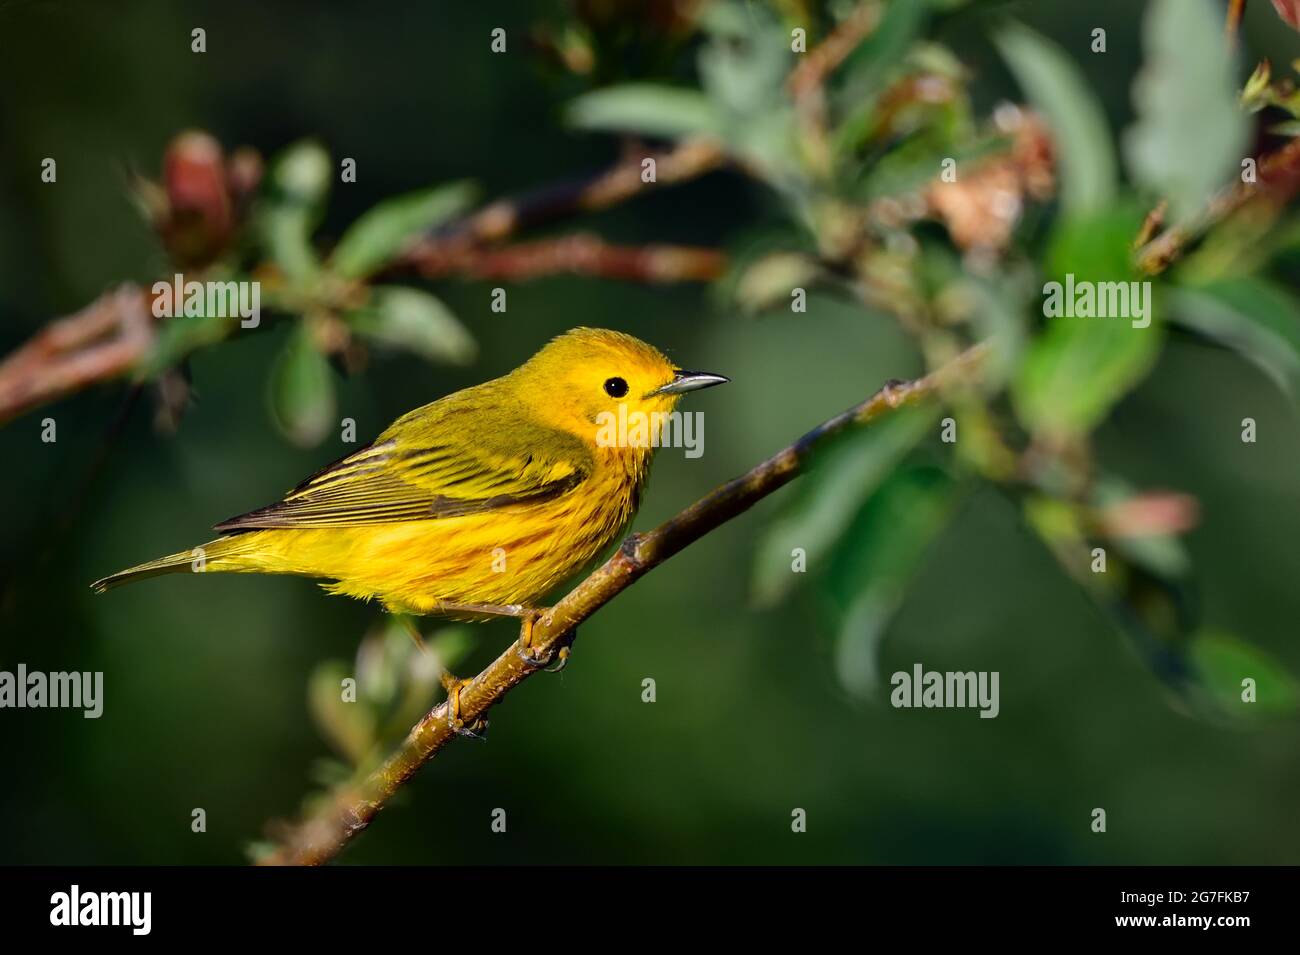 A Yellow Warbler ' Dendroica petechia', perched on a willow branch in rural Alberta Canada. Stock Photo